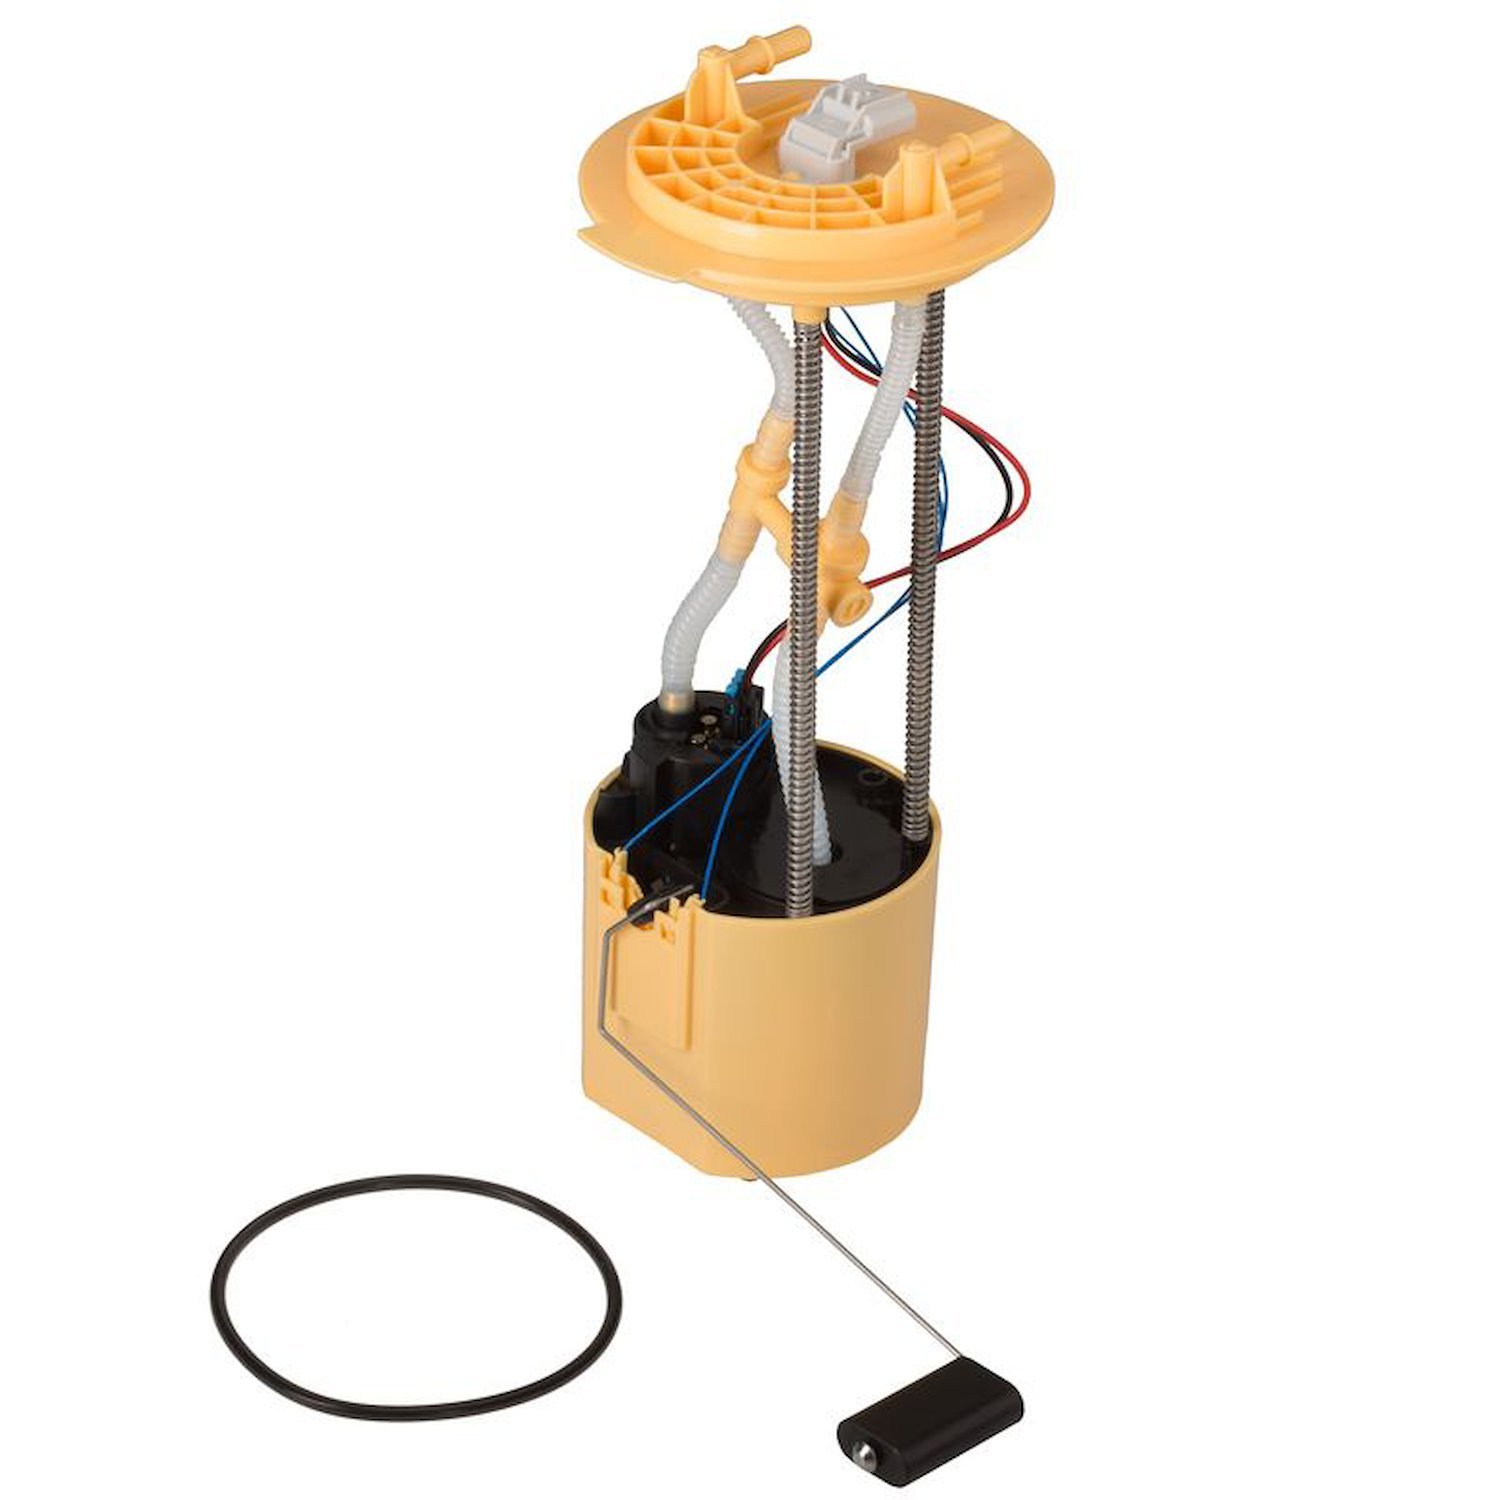 OE Chrysler/Dodge Replacement Fuel Pump Module Assembly for 2005-2009 Dodge Ram 2500/3500